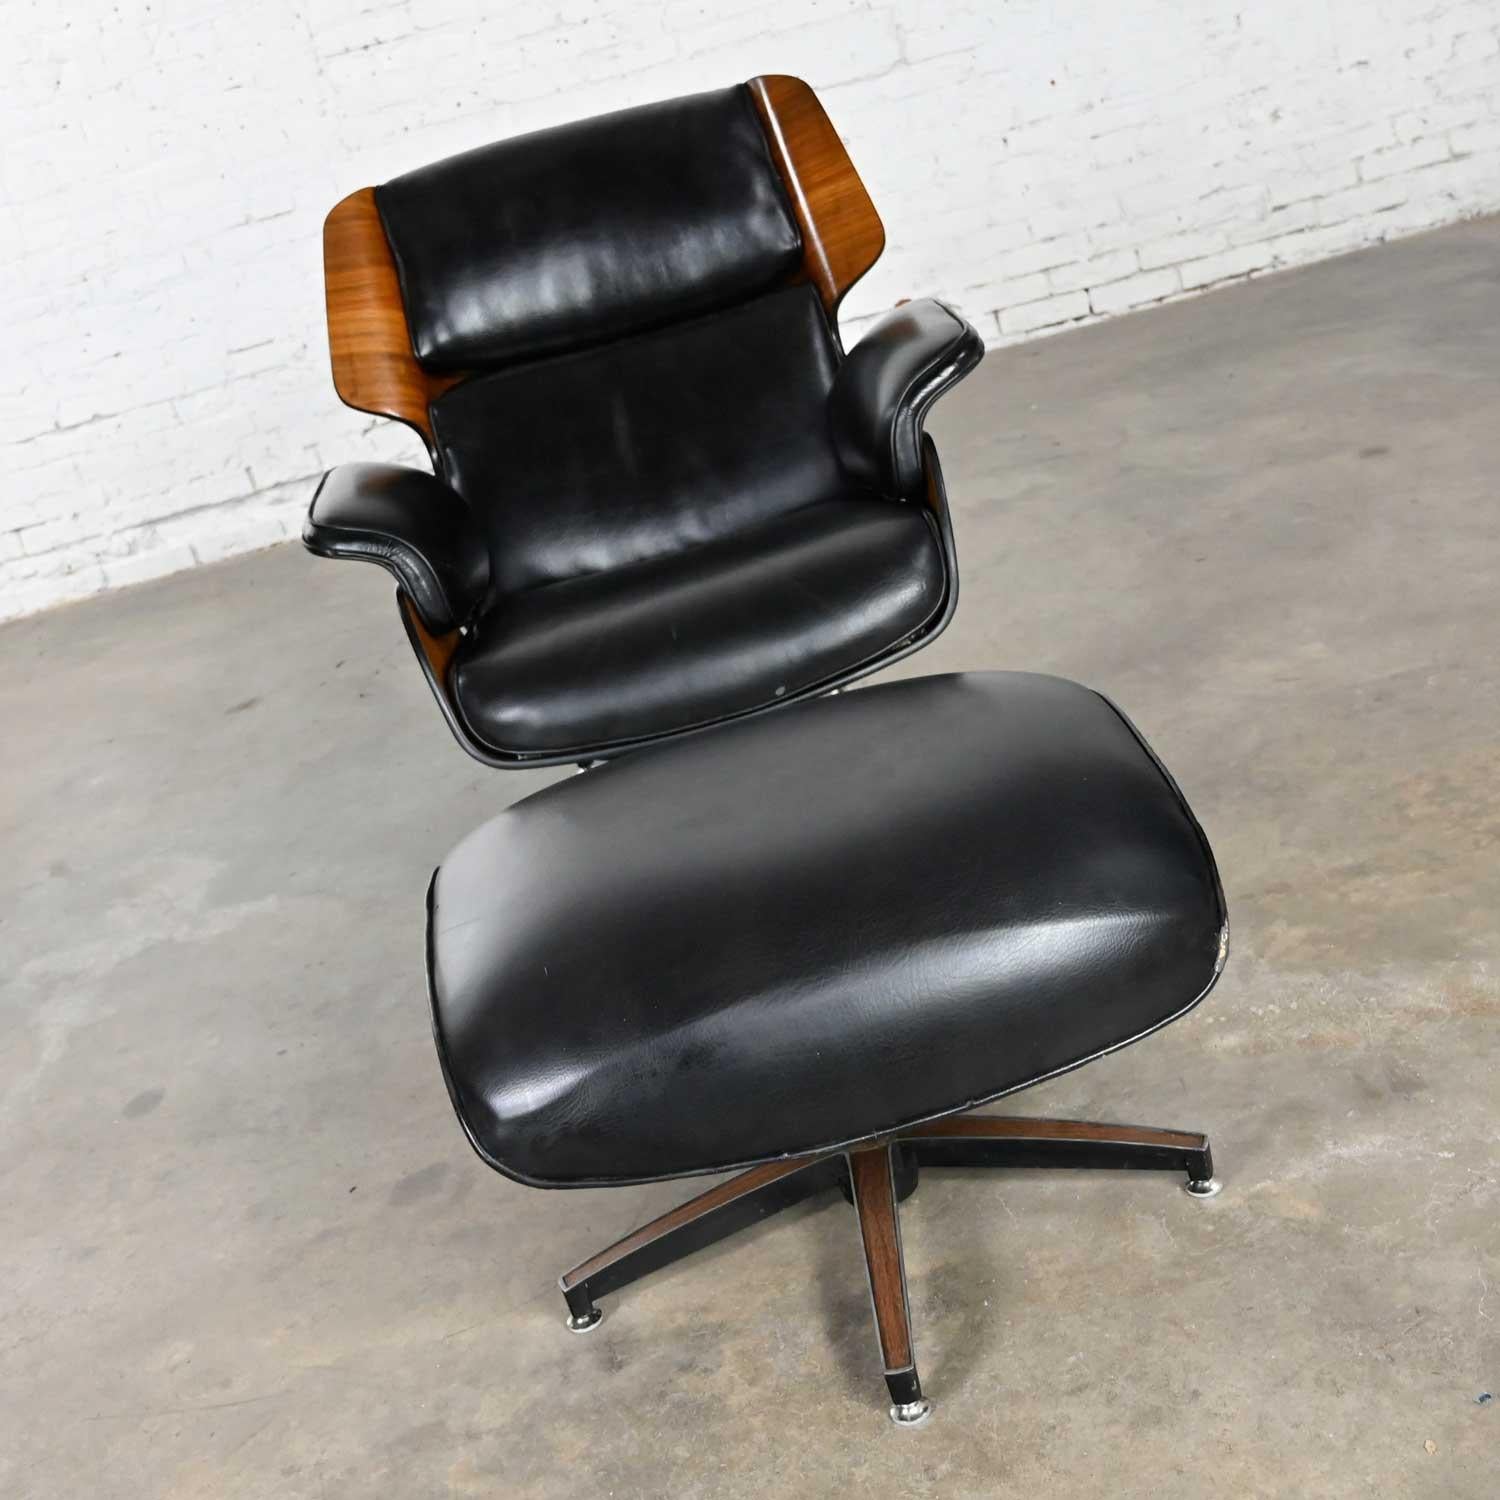 Stunning Drexel Declaration molded plywood and black faux leather lounge chair and ottoman by Kipp Stewart and Stewart MacDougall. Beautiful condition, keeping in mind that these are vintage and not new so will have signs of use and wear. There are